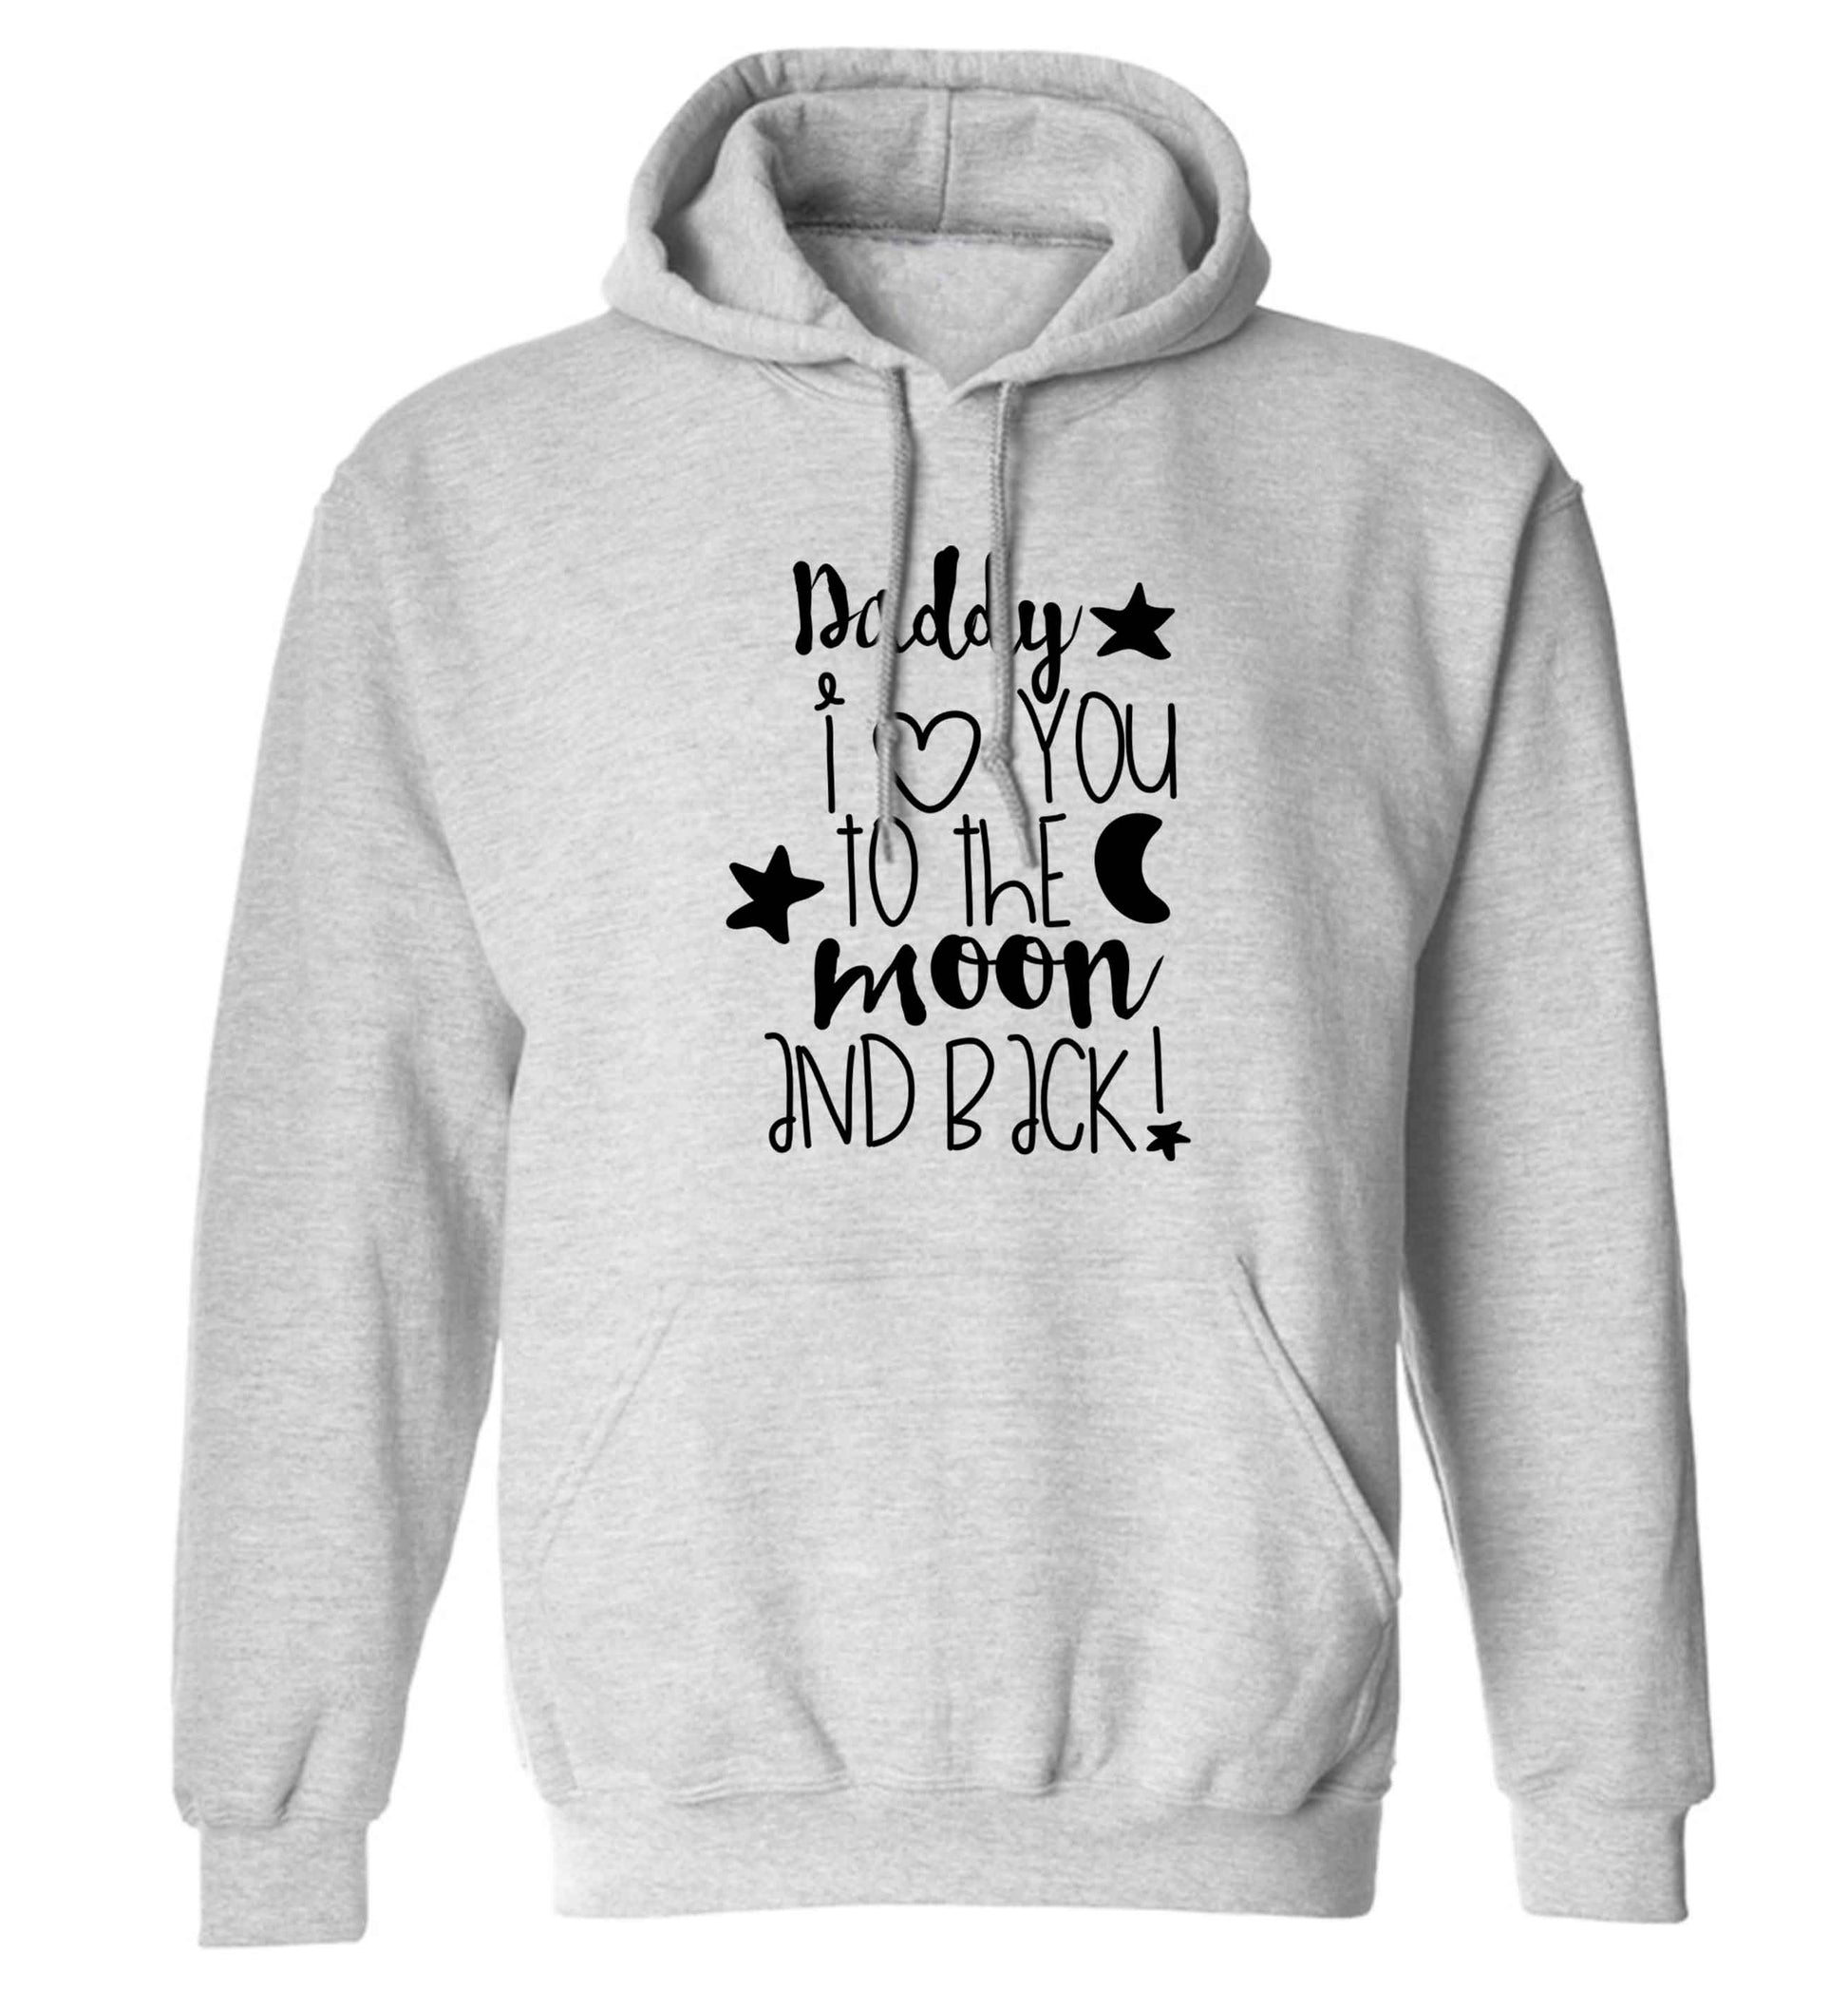 Daddy I love you to the moon and back adults unisex grey hoodie 2XL